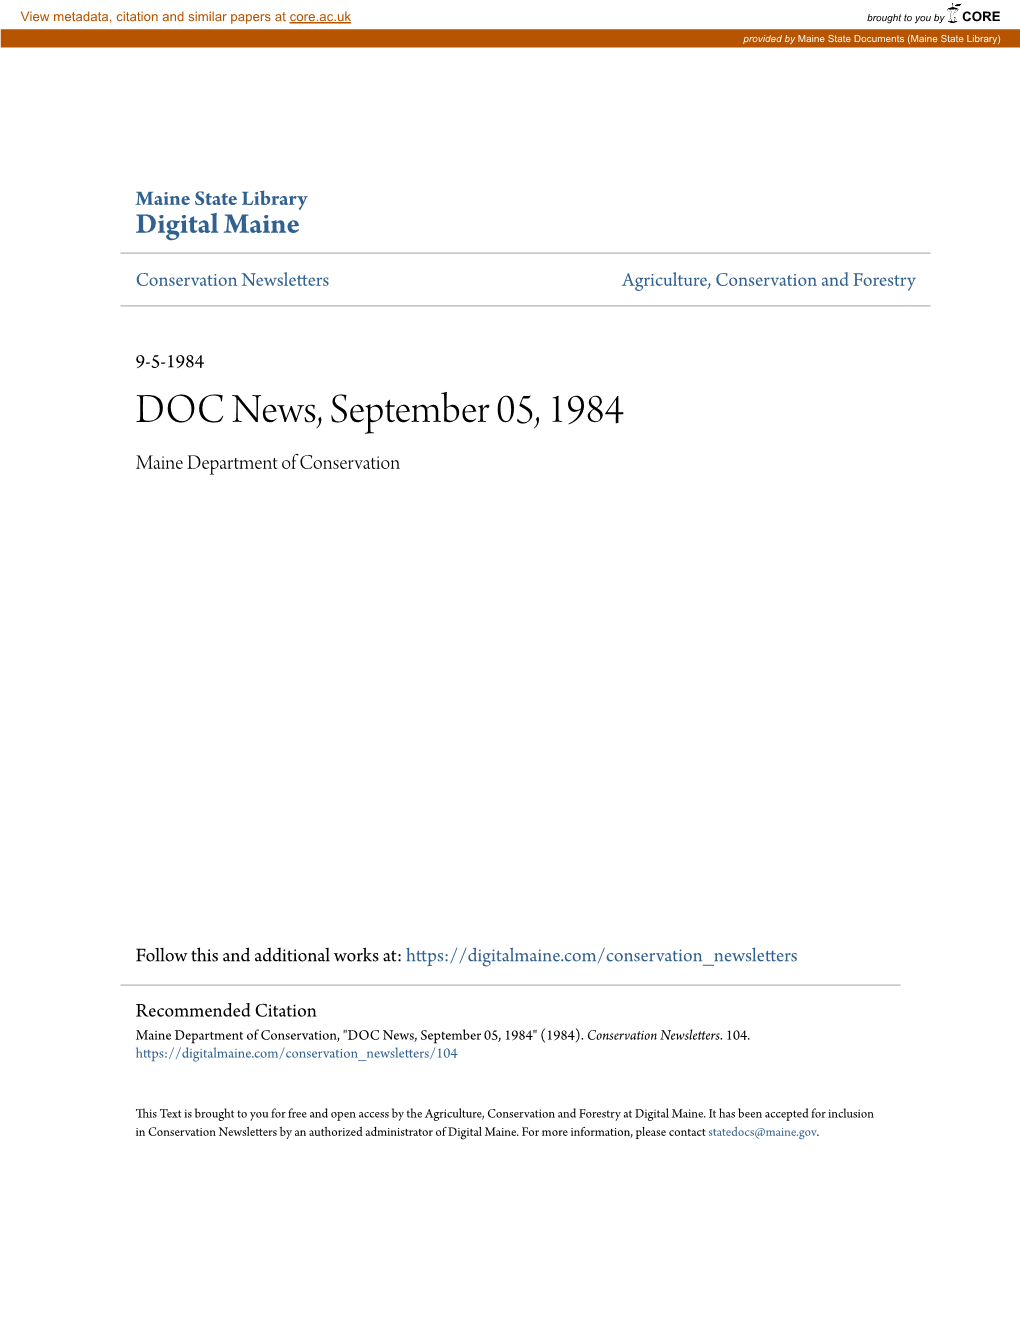 DOC News, September 05, 1984 Maine Department of Conservation